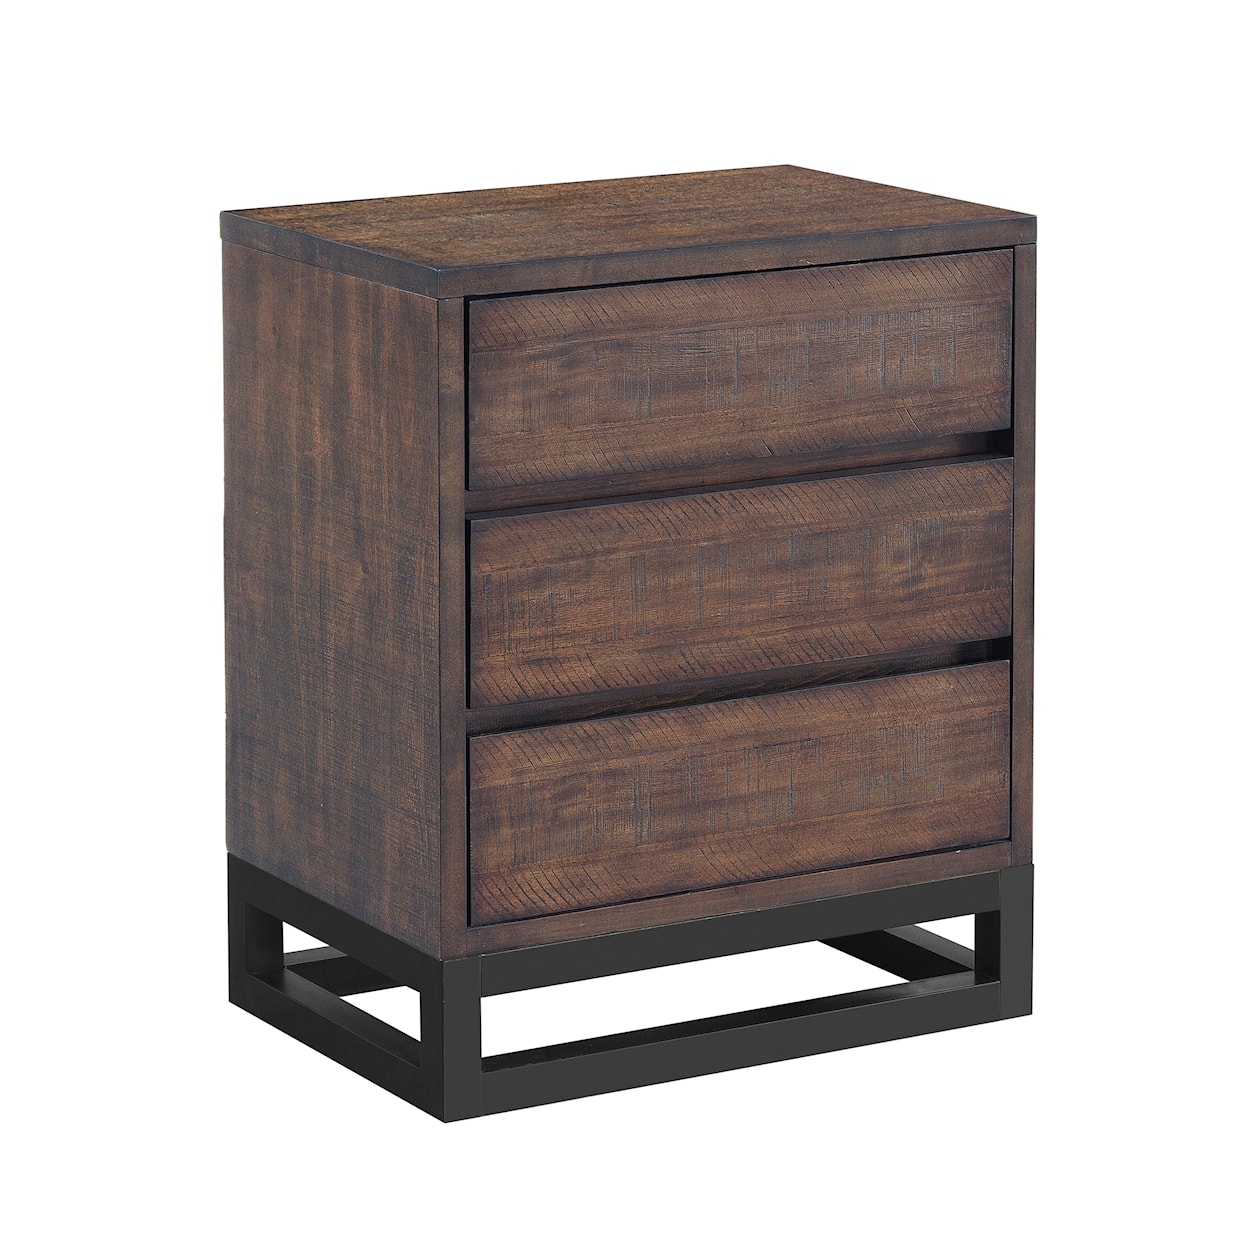 Accentrics Home Accents Modern Industrial Nightstand